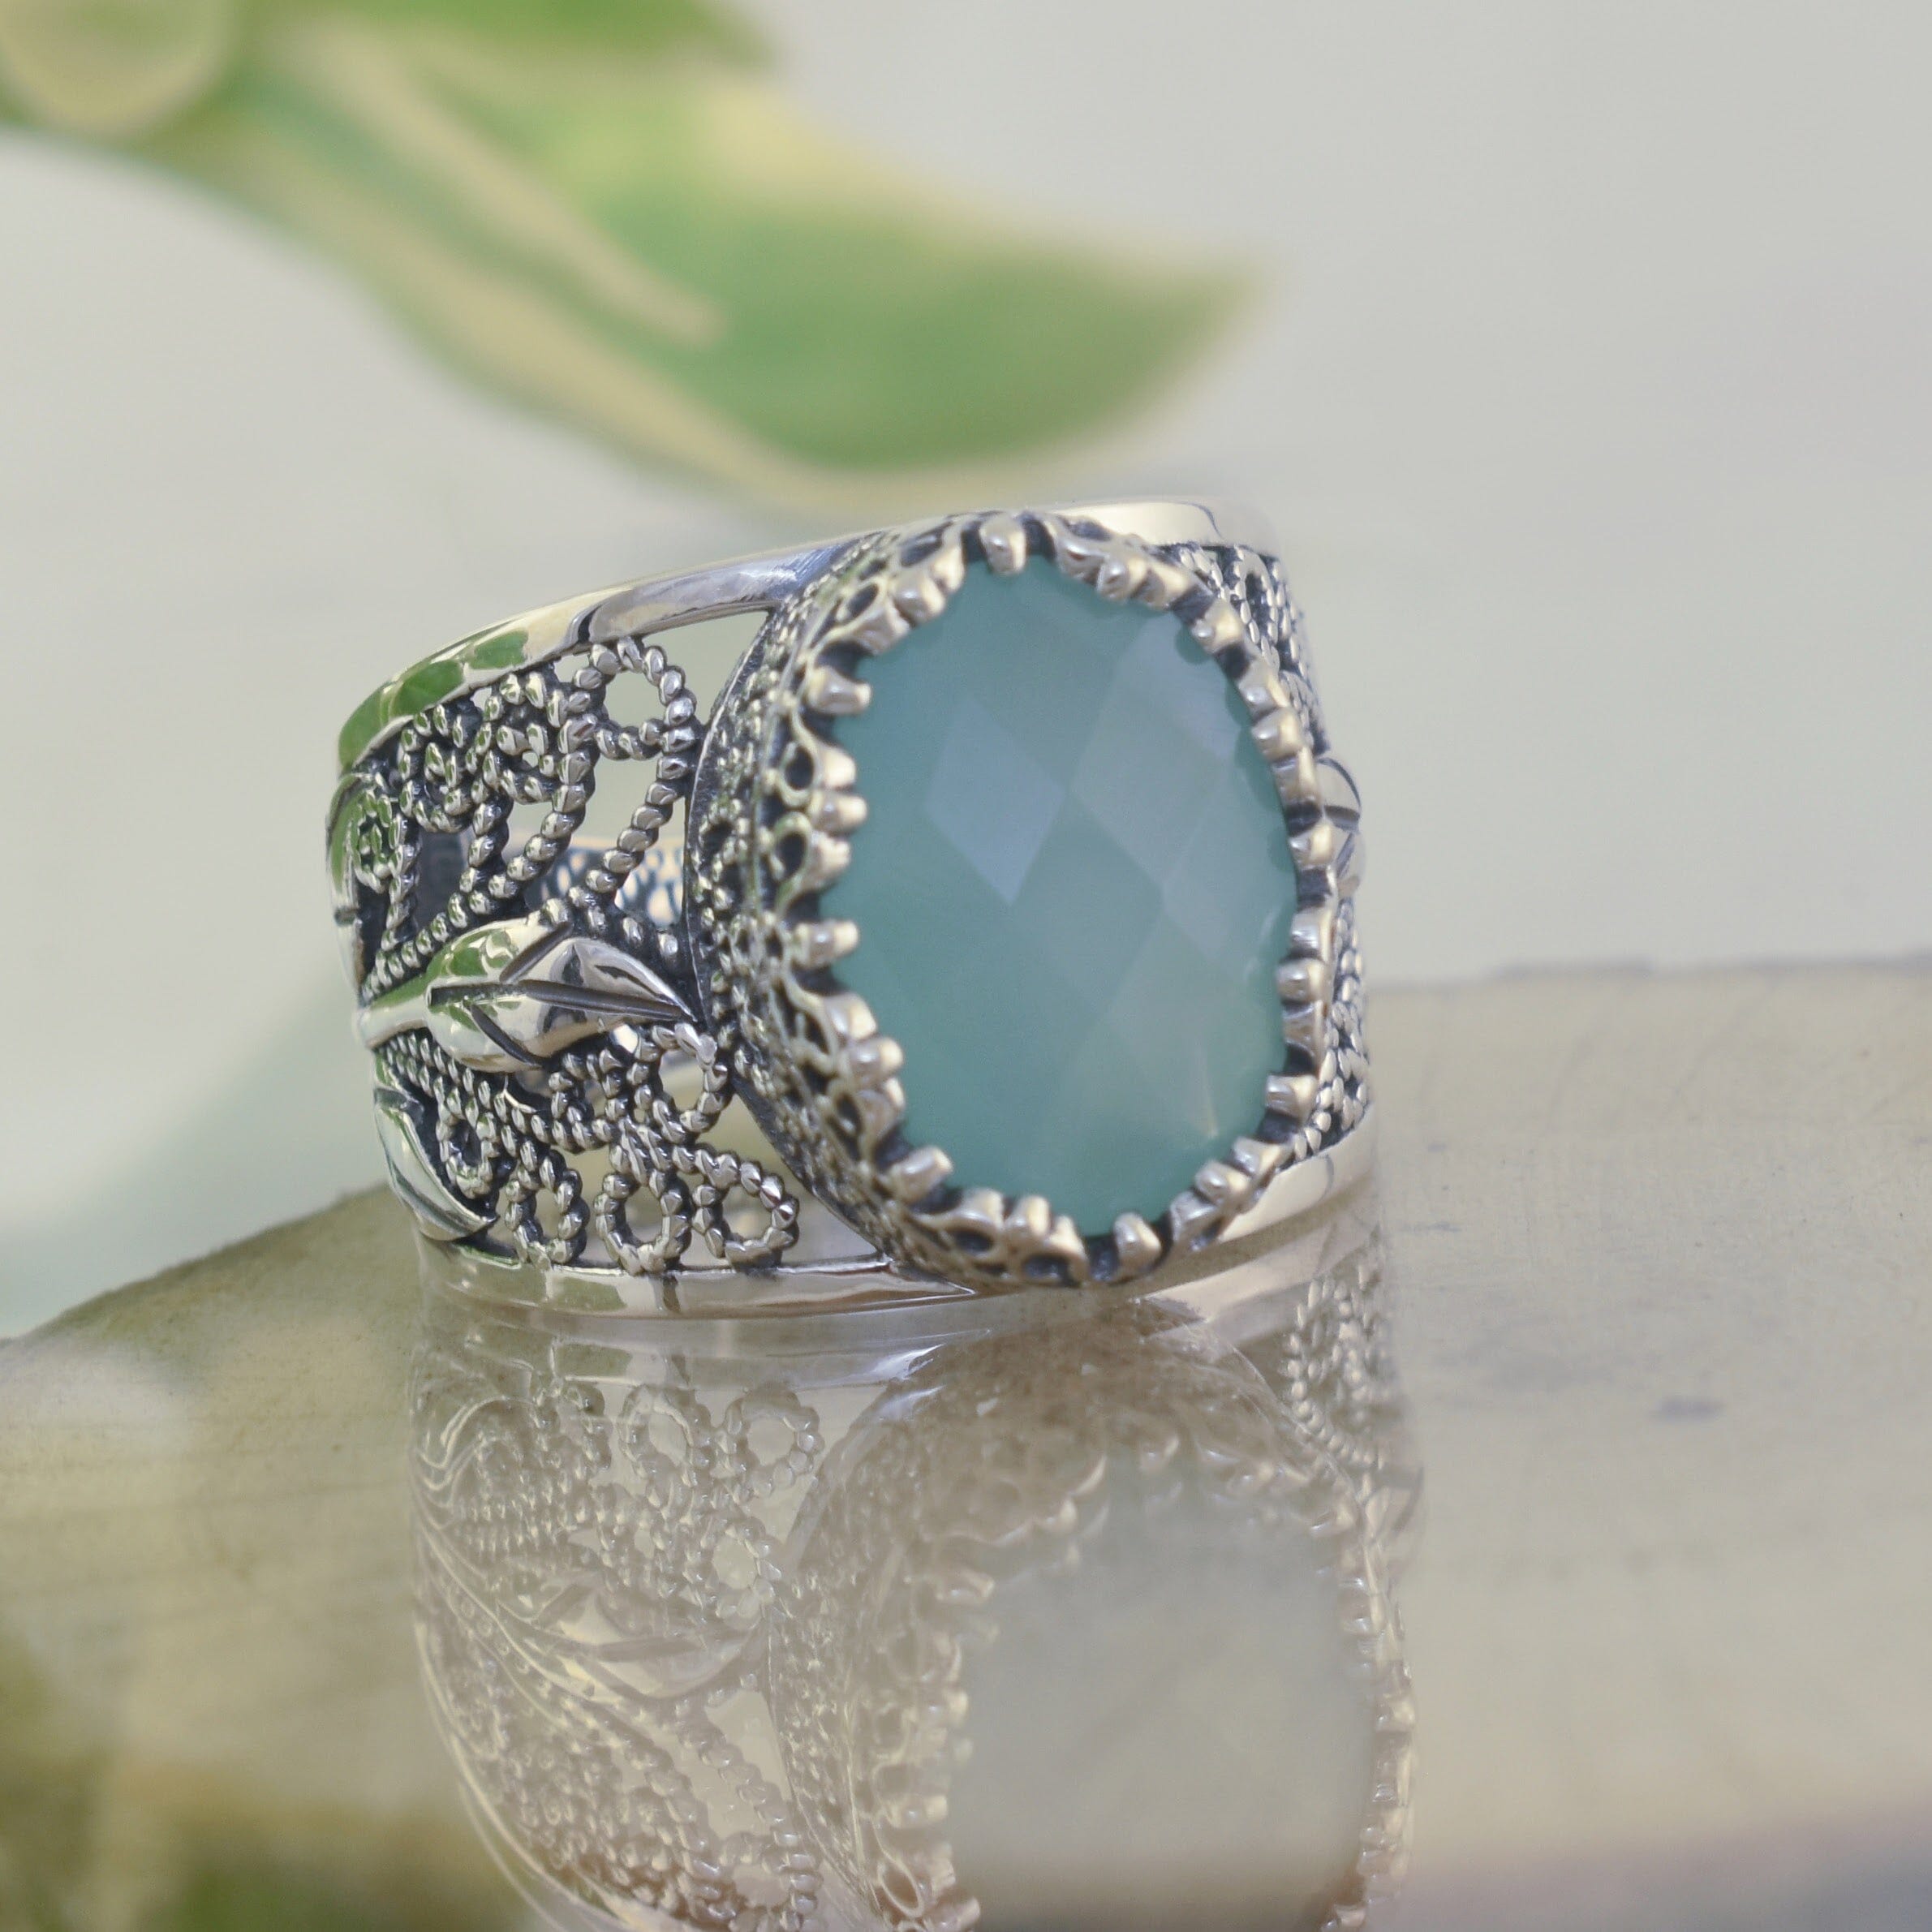 .925 sterling silver wide band ring with aqua chalcedony stone